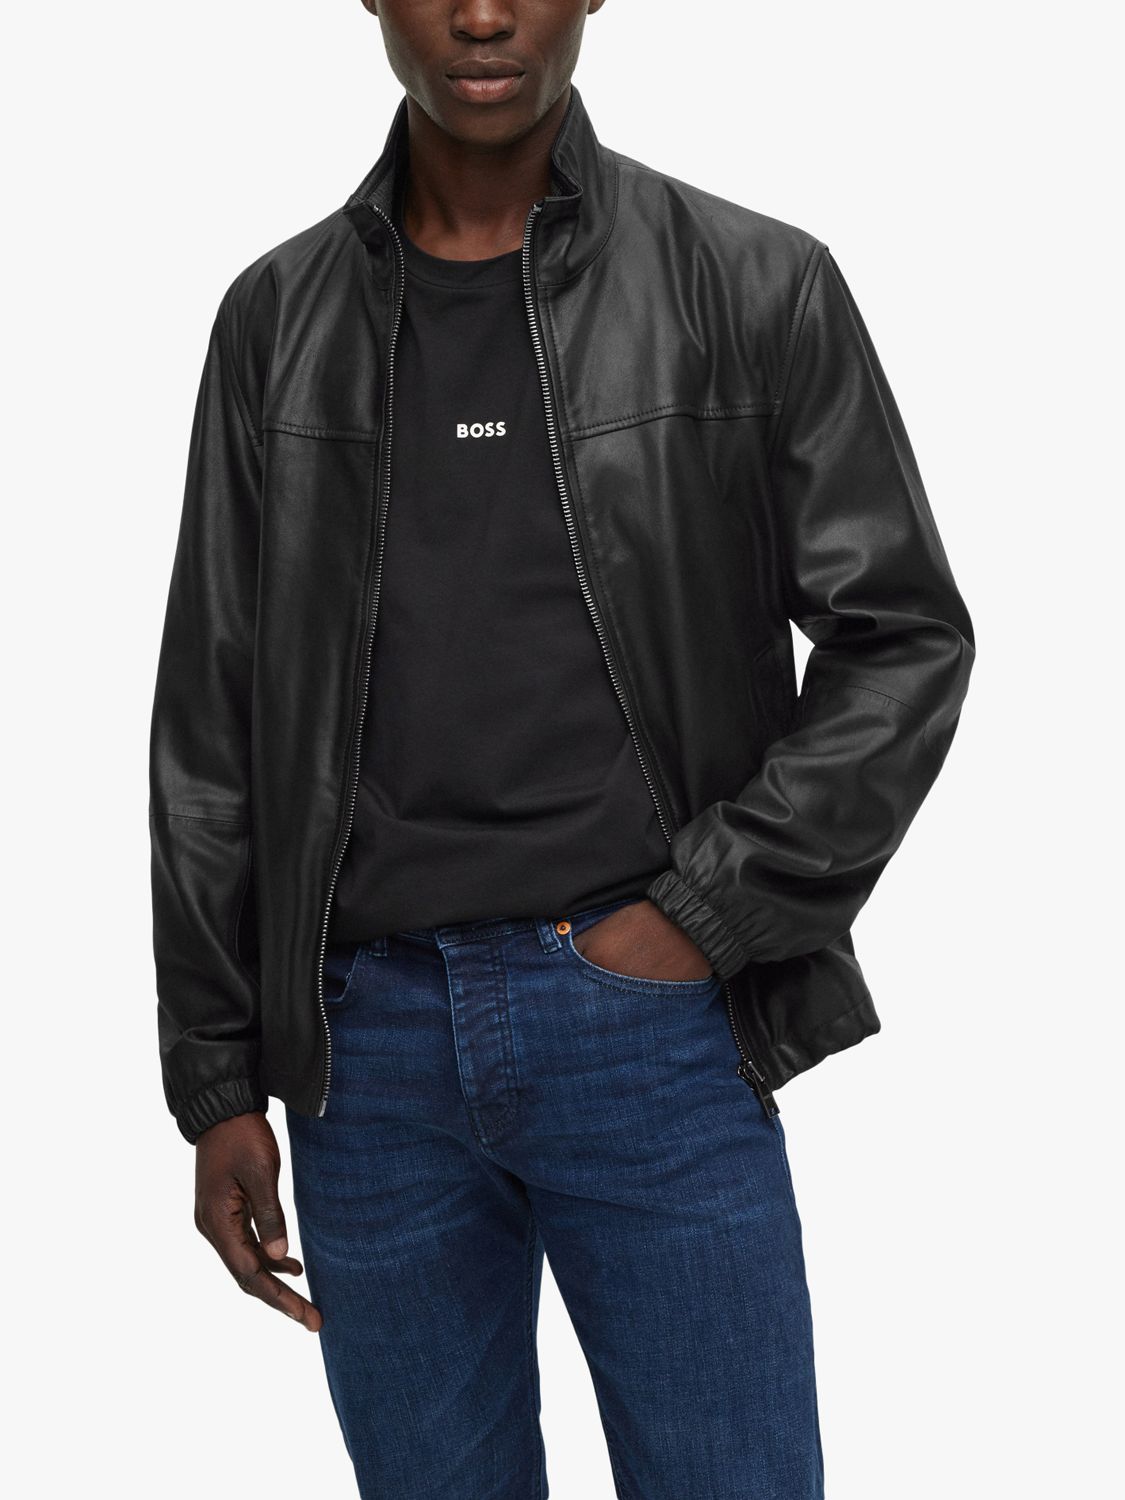 BOSS Leather Jacket, 34R